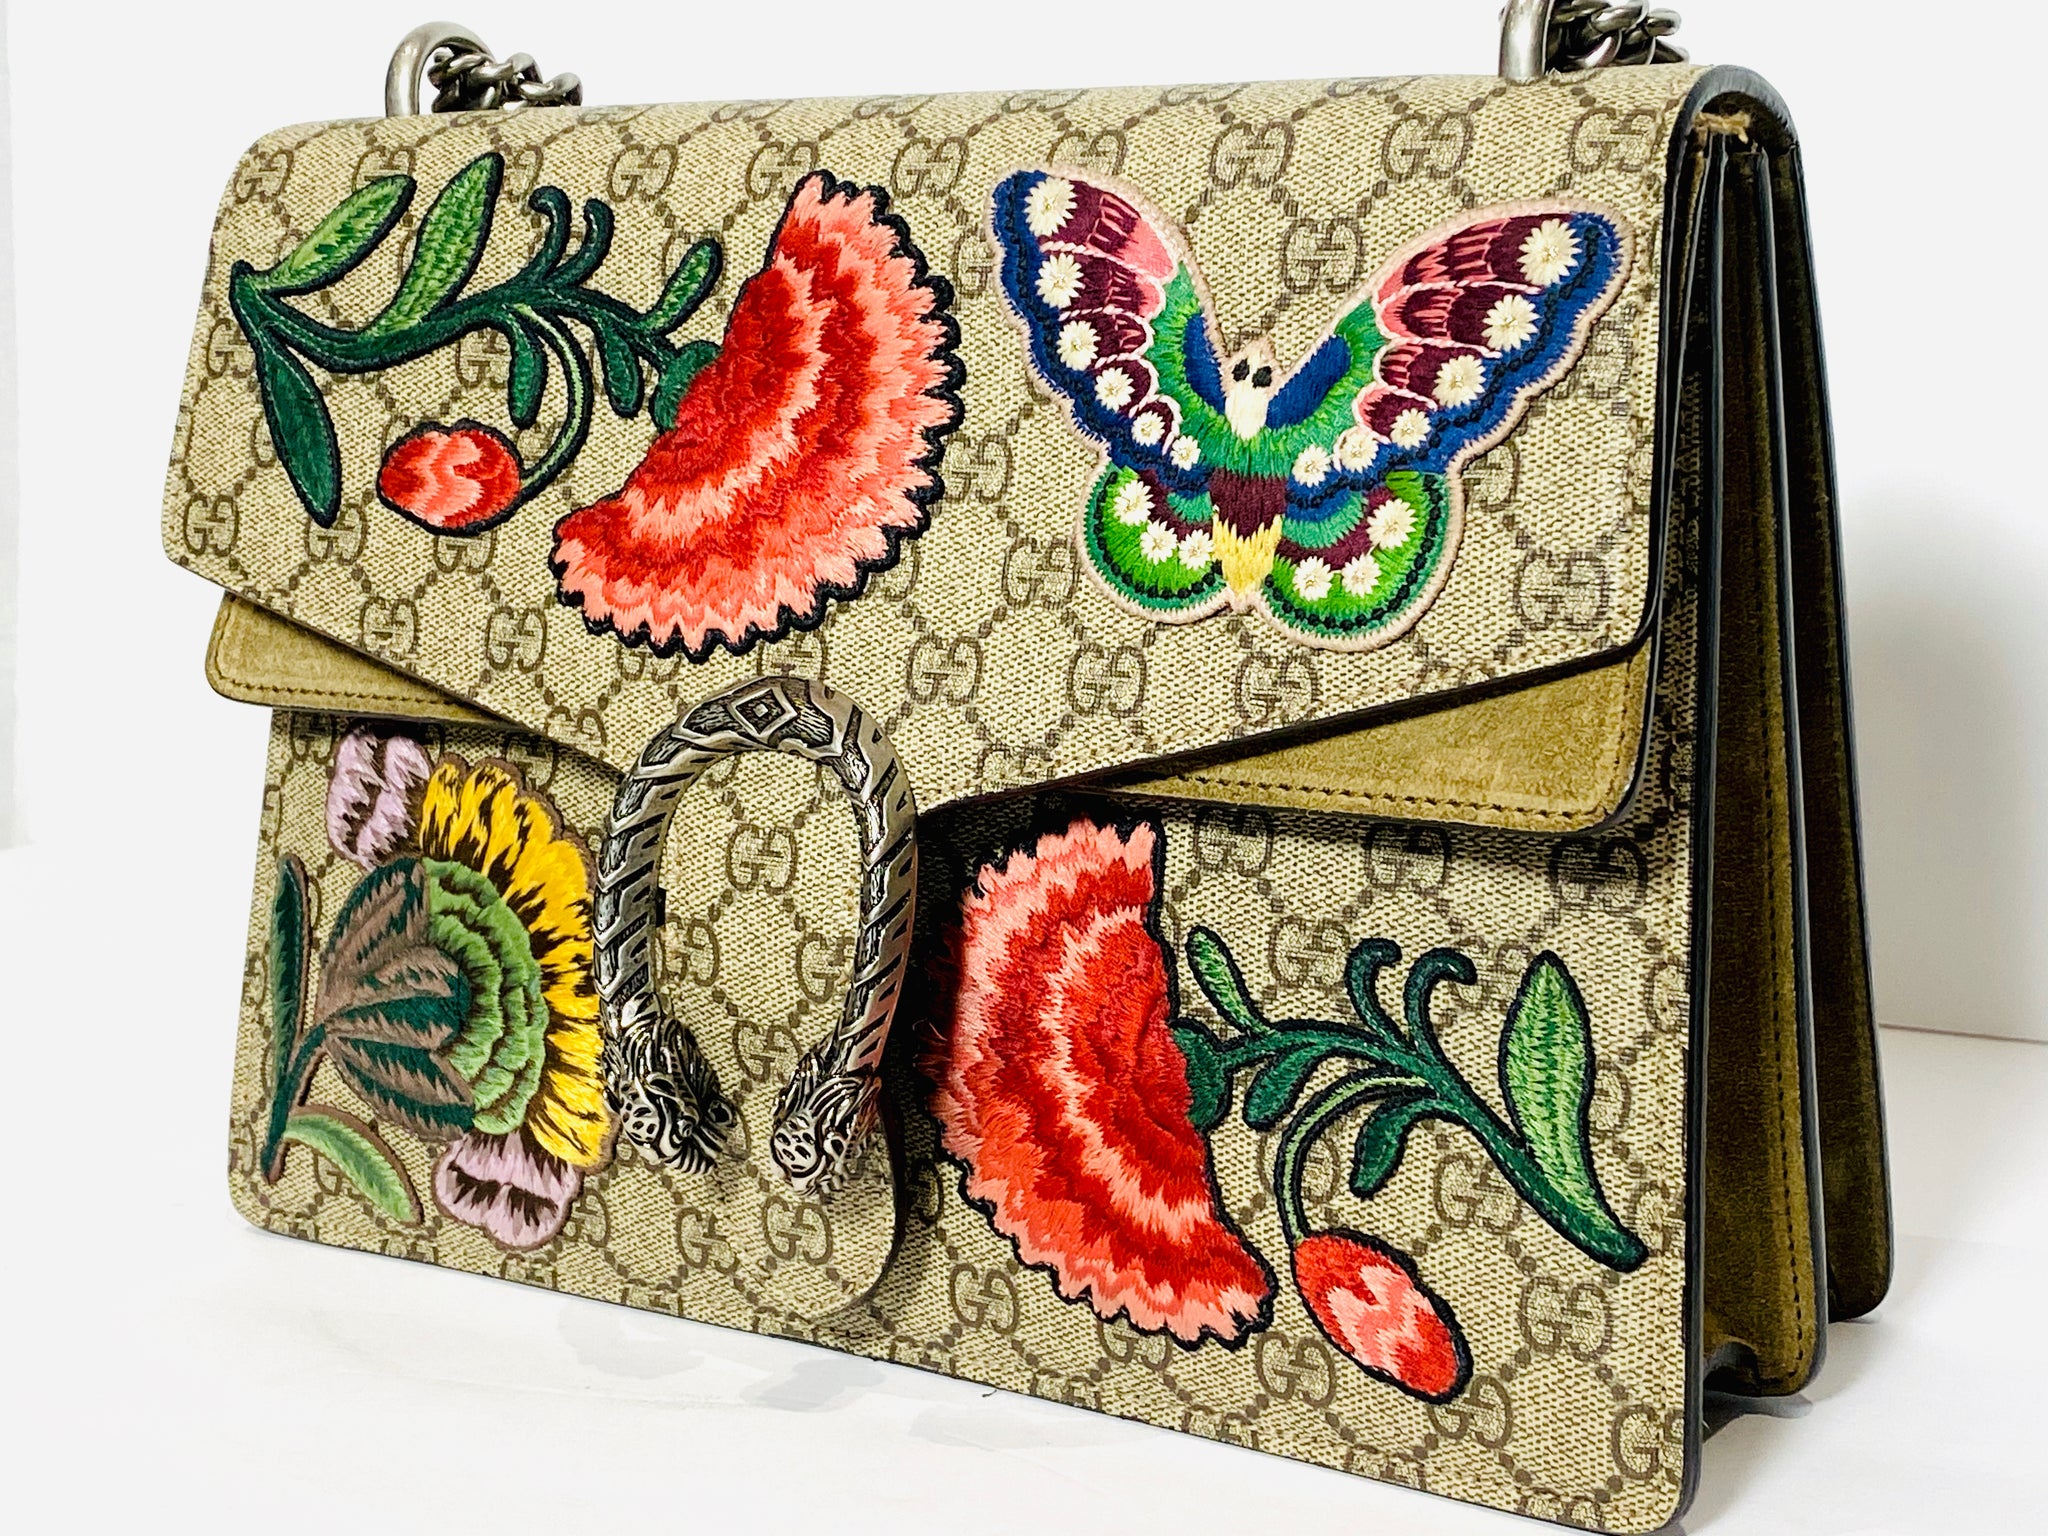 Gucci Dionysus Small Embroidered Floral Satchel Bag